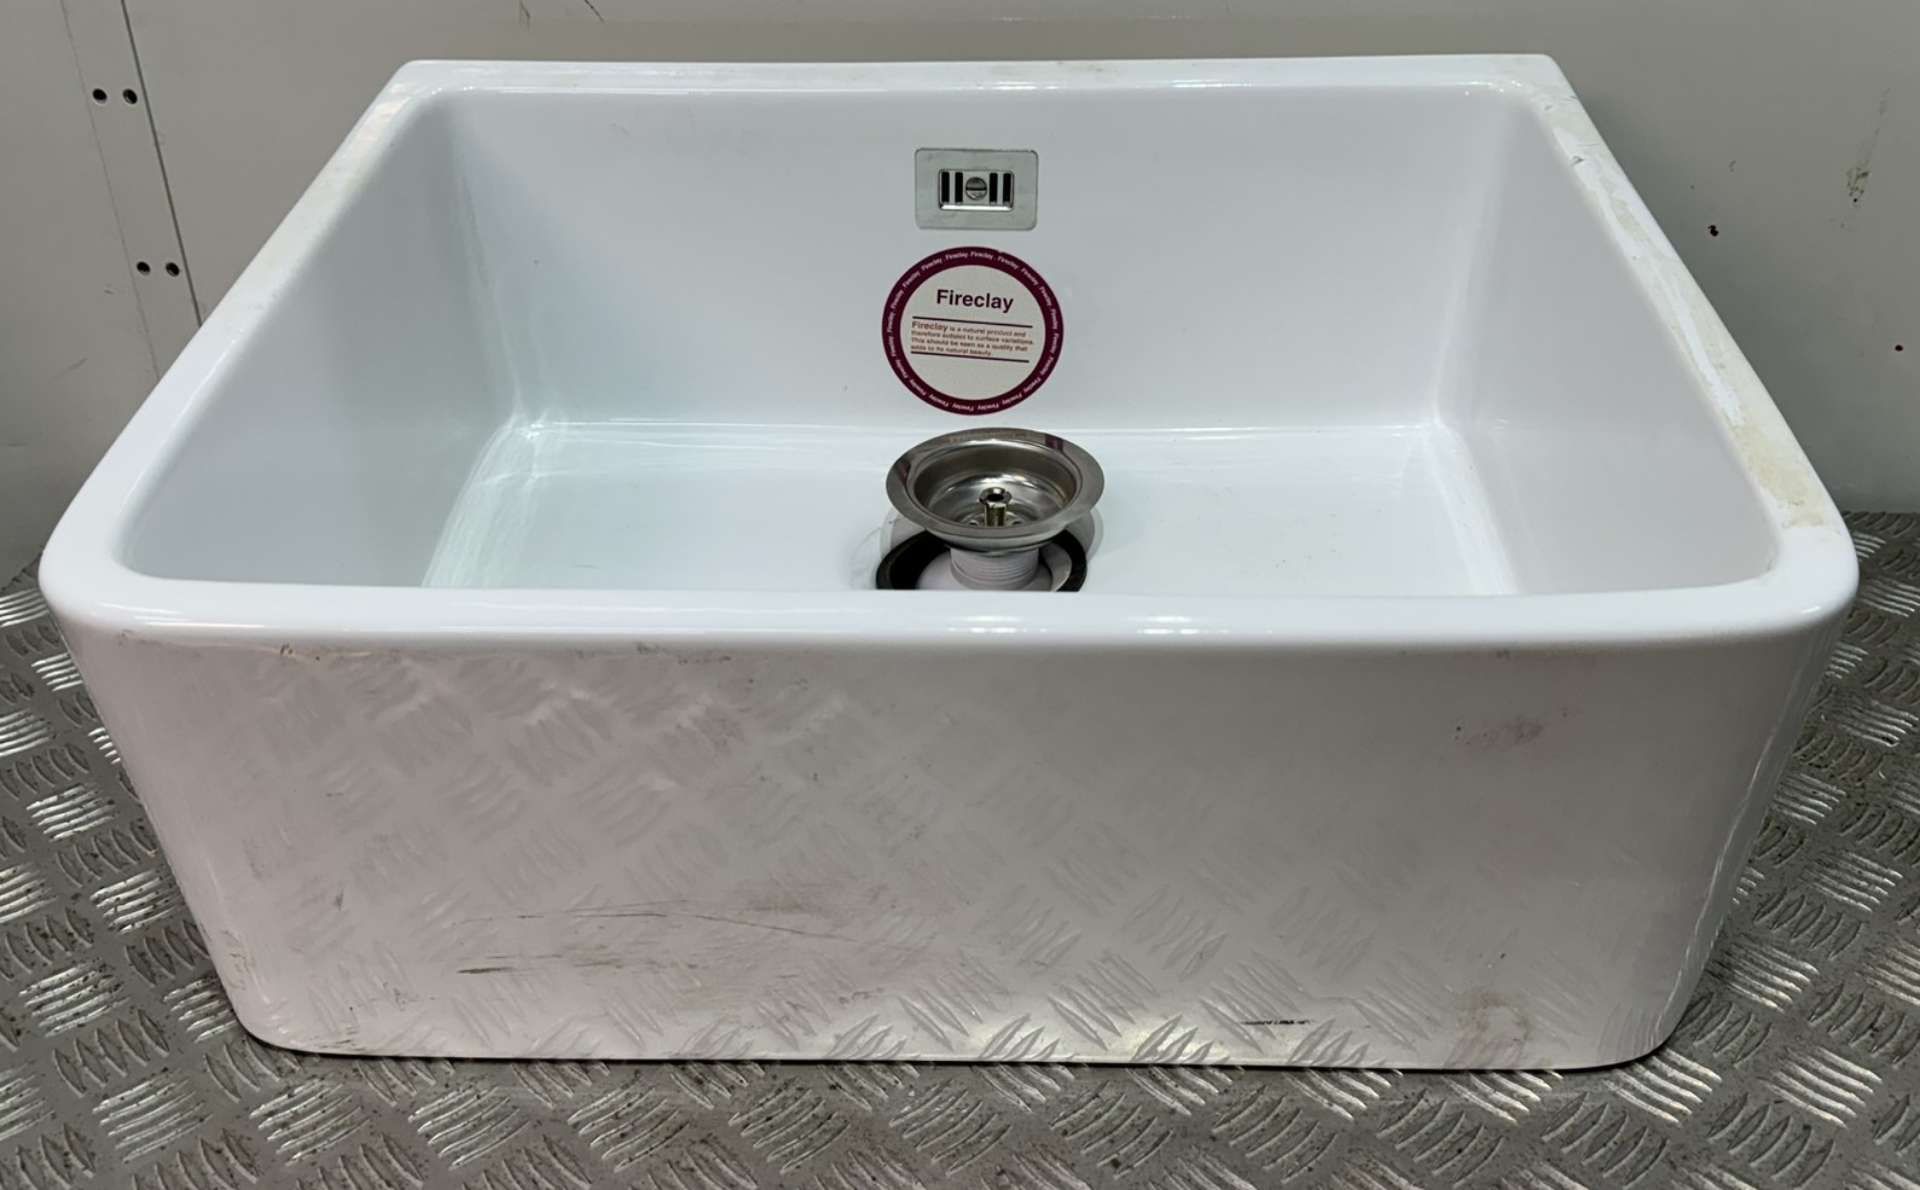 EX-DISPLAY UNBRANDED WHITE BATHROOM SINK W/ WASTE *SCRATCHES SEE PICTURES*